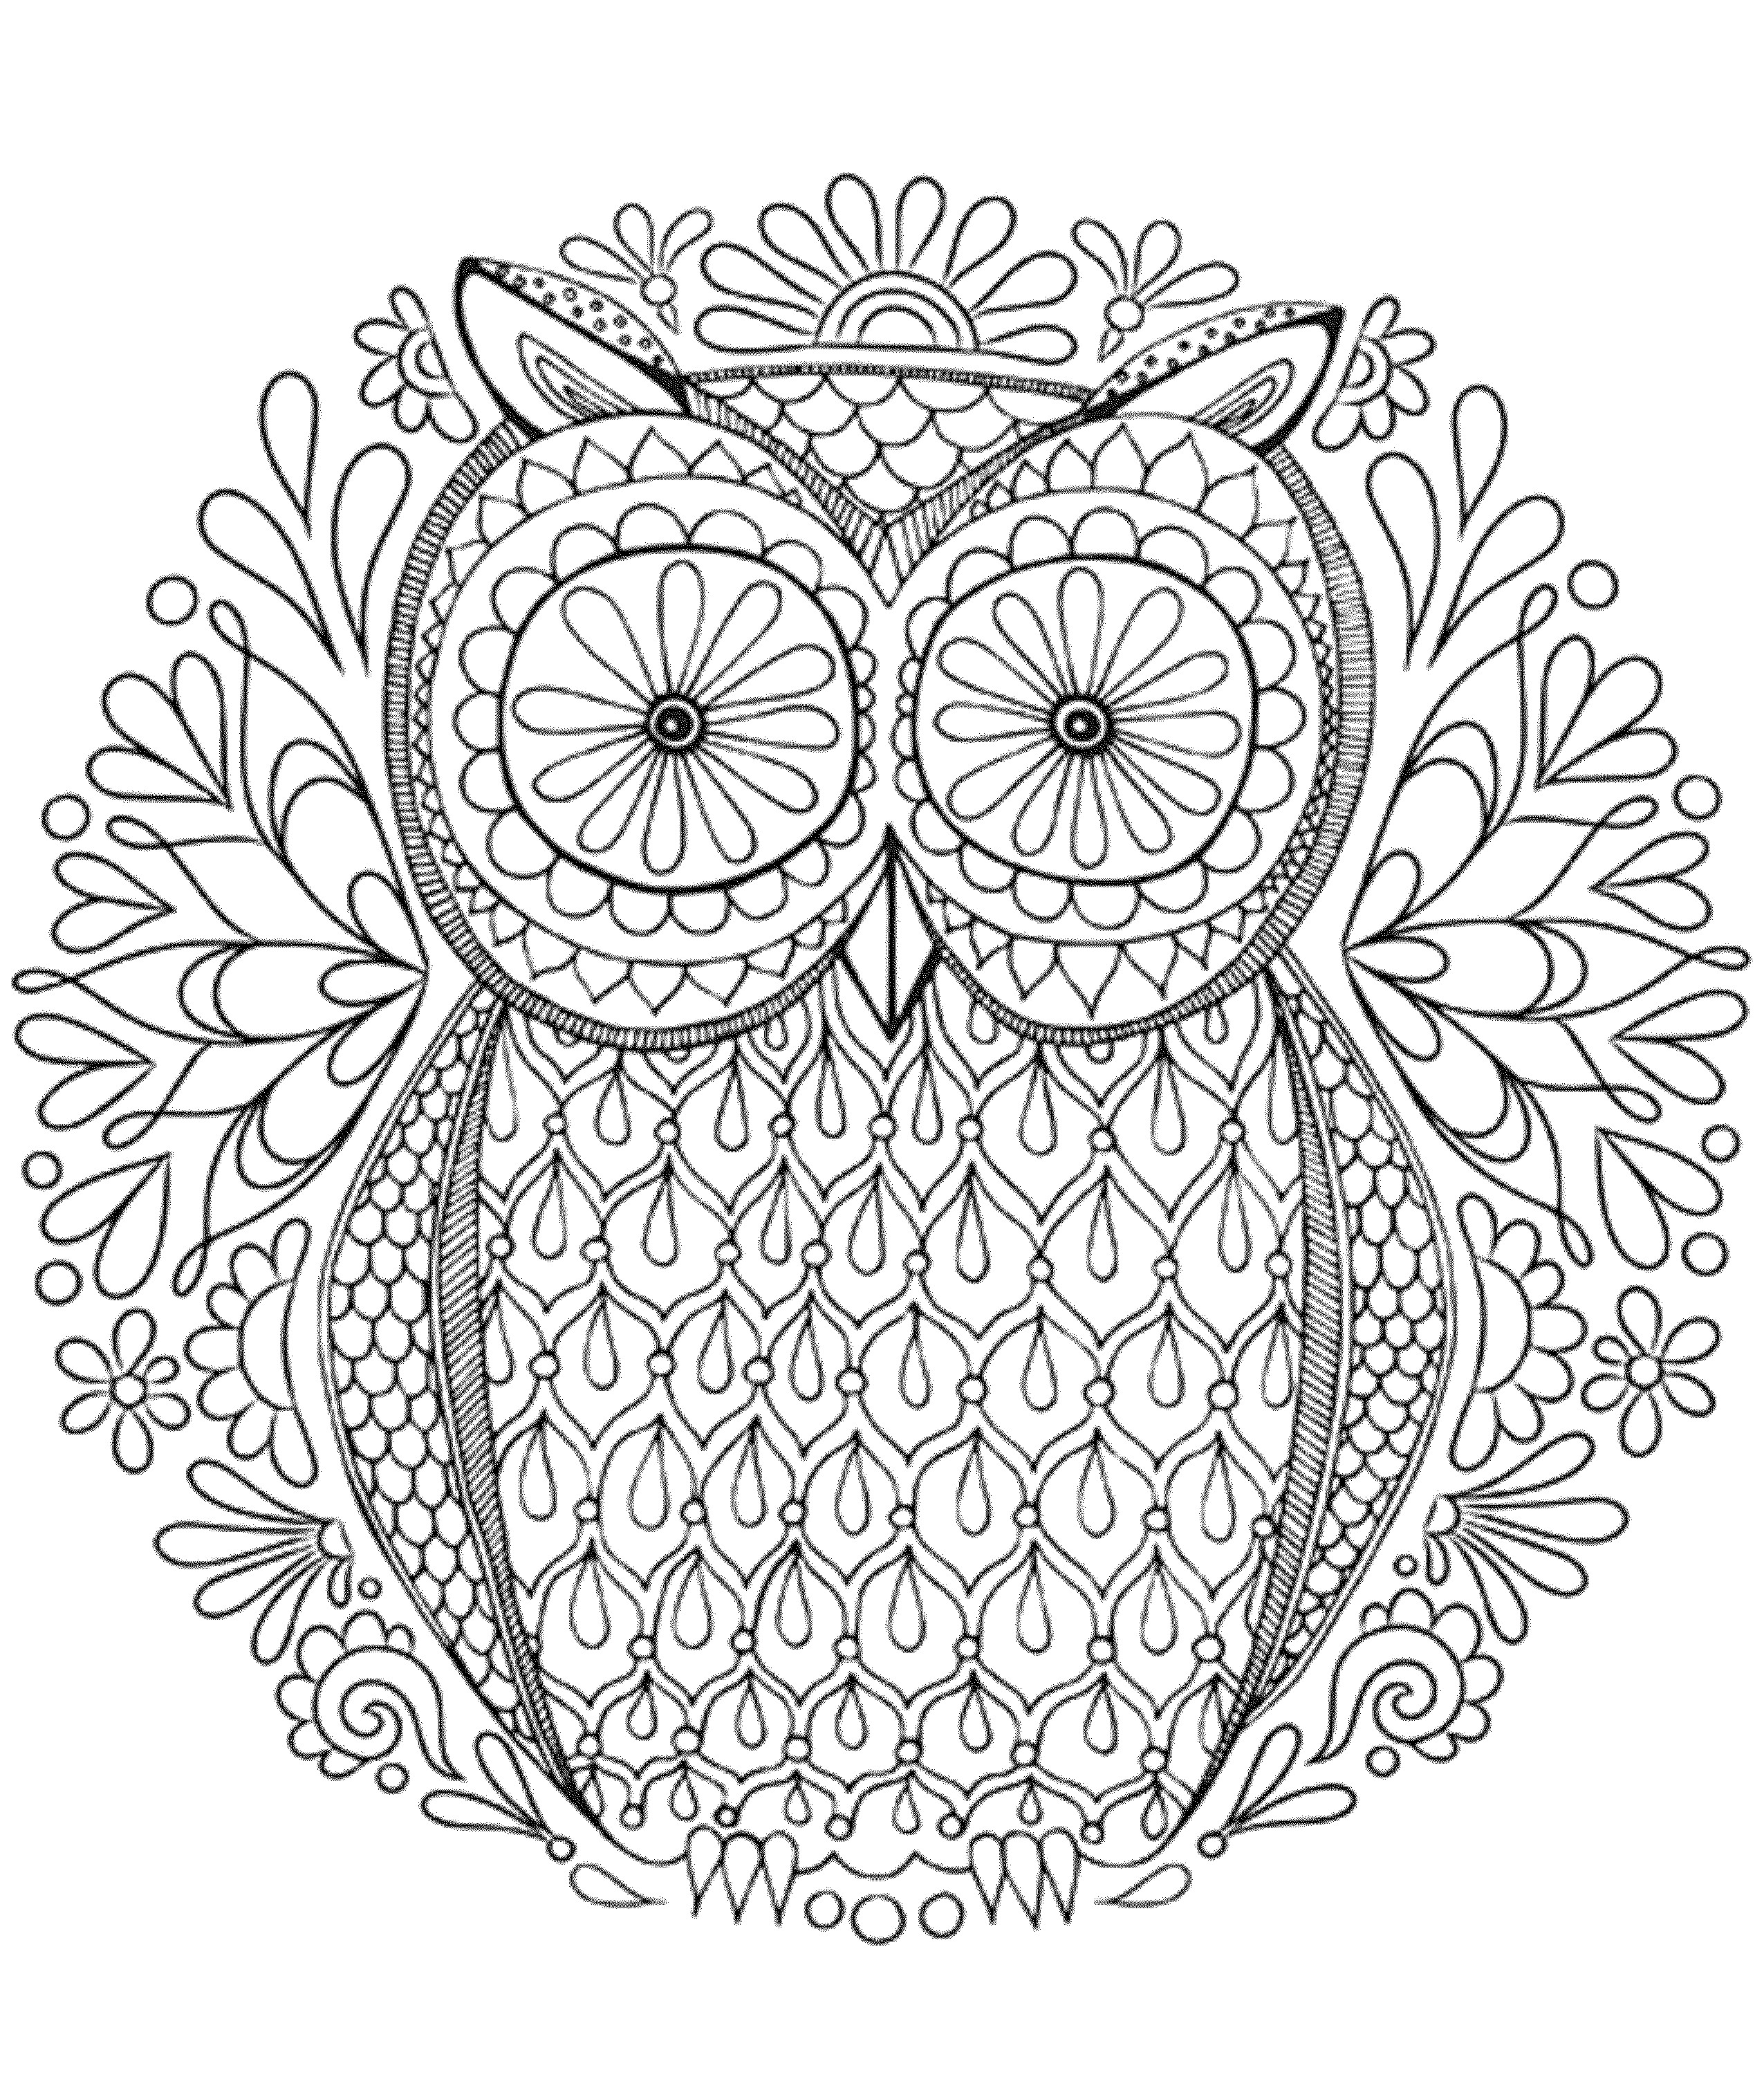 Free Coloring Pages Adult
 Hard Coloring Pages for Adults Best Coloring Pages For Kids